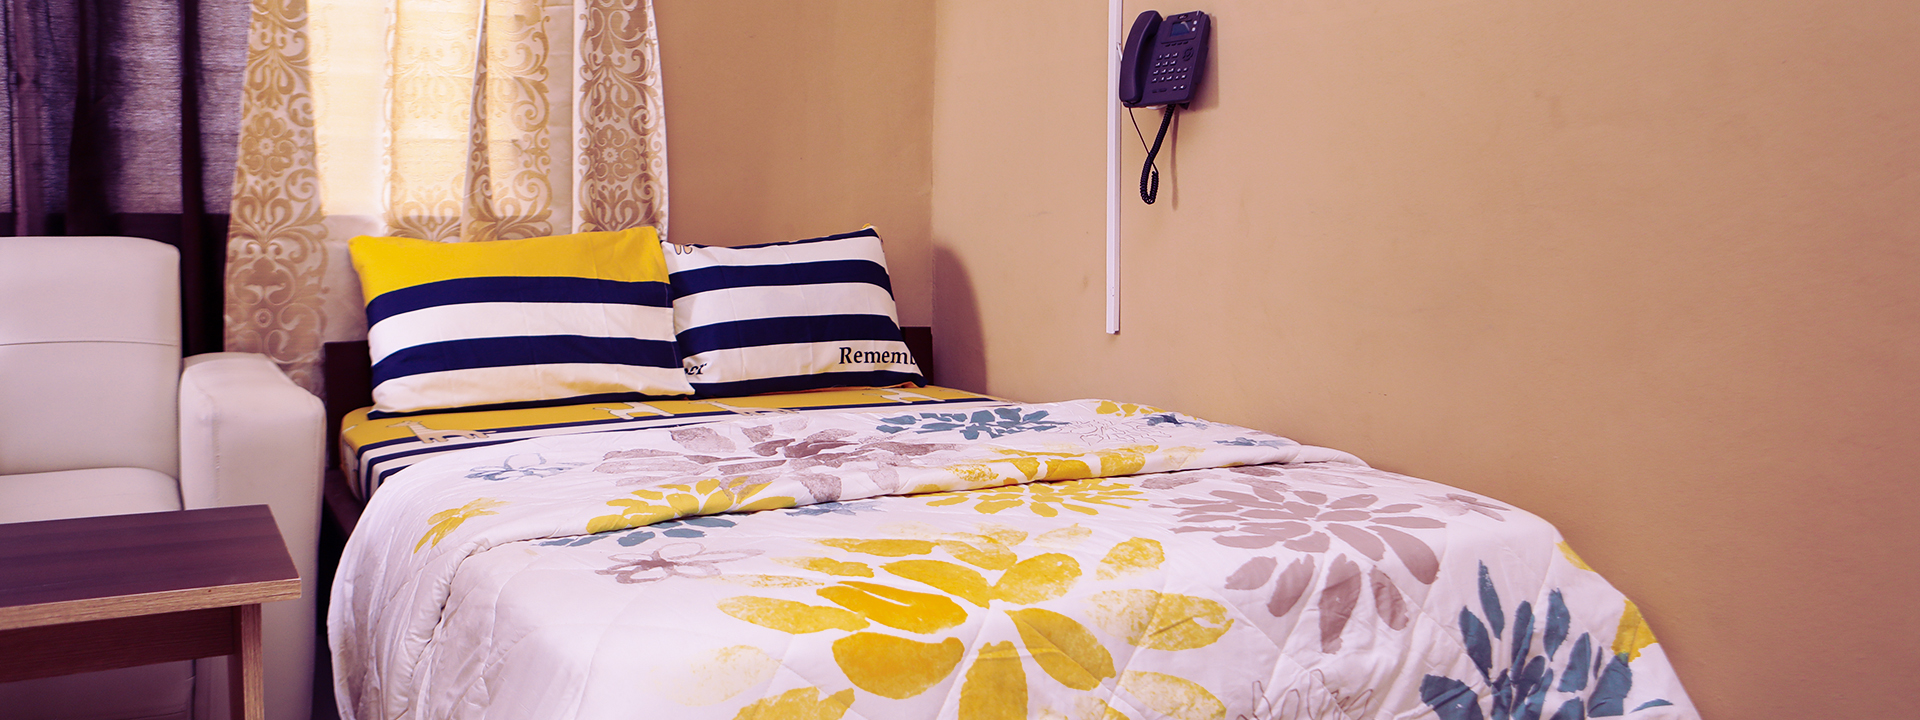 Our rooms are conducive and cozy for your relaxation